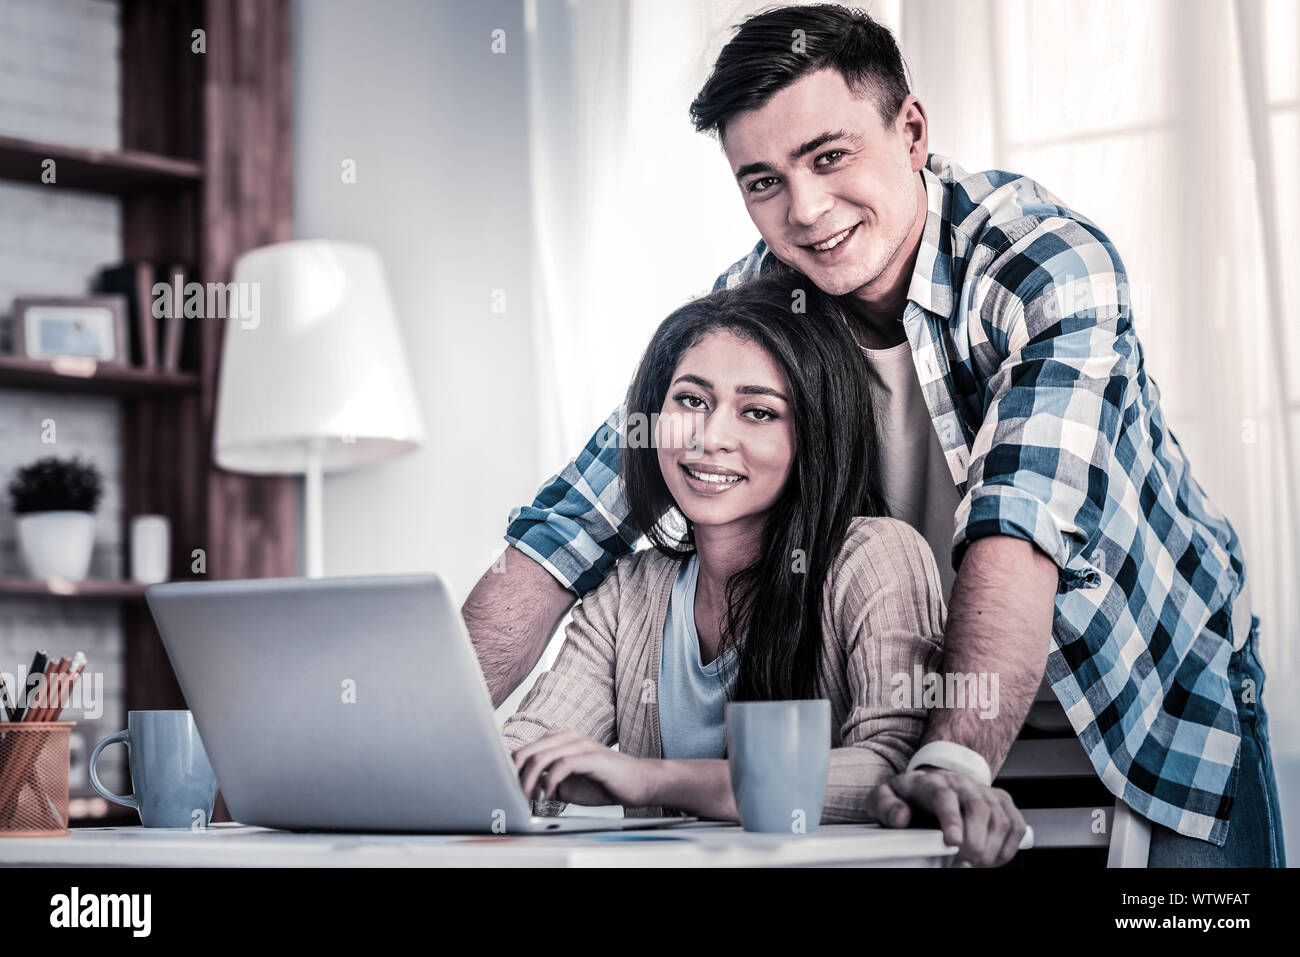 Mixed race young lady sitting on the chair with her boyfriend Stock Photo